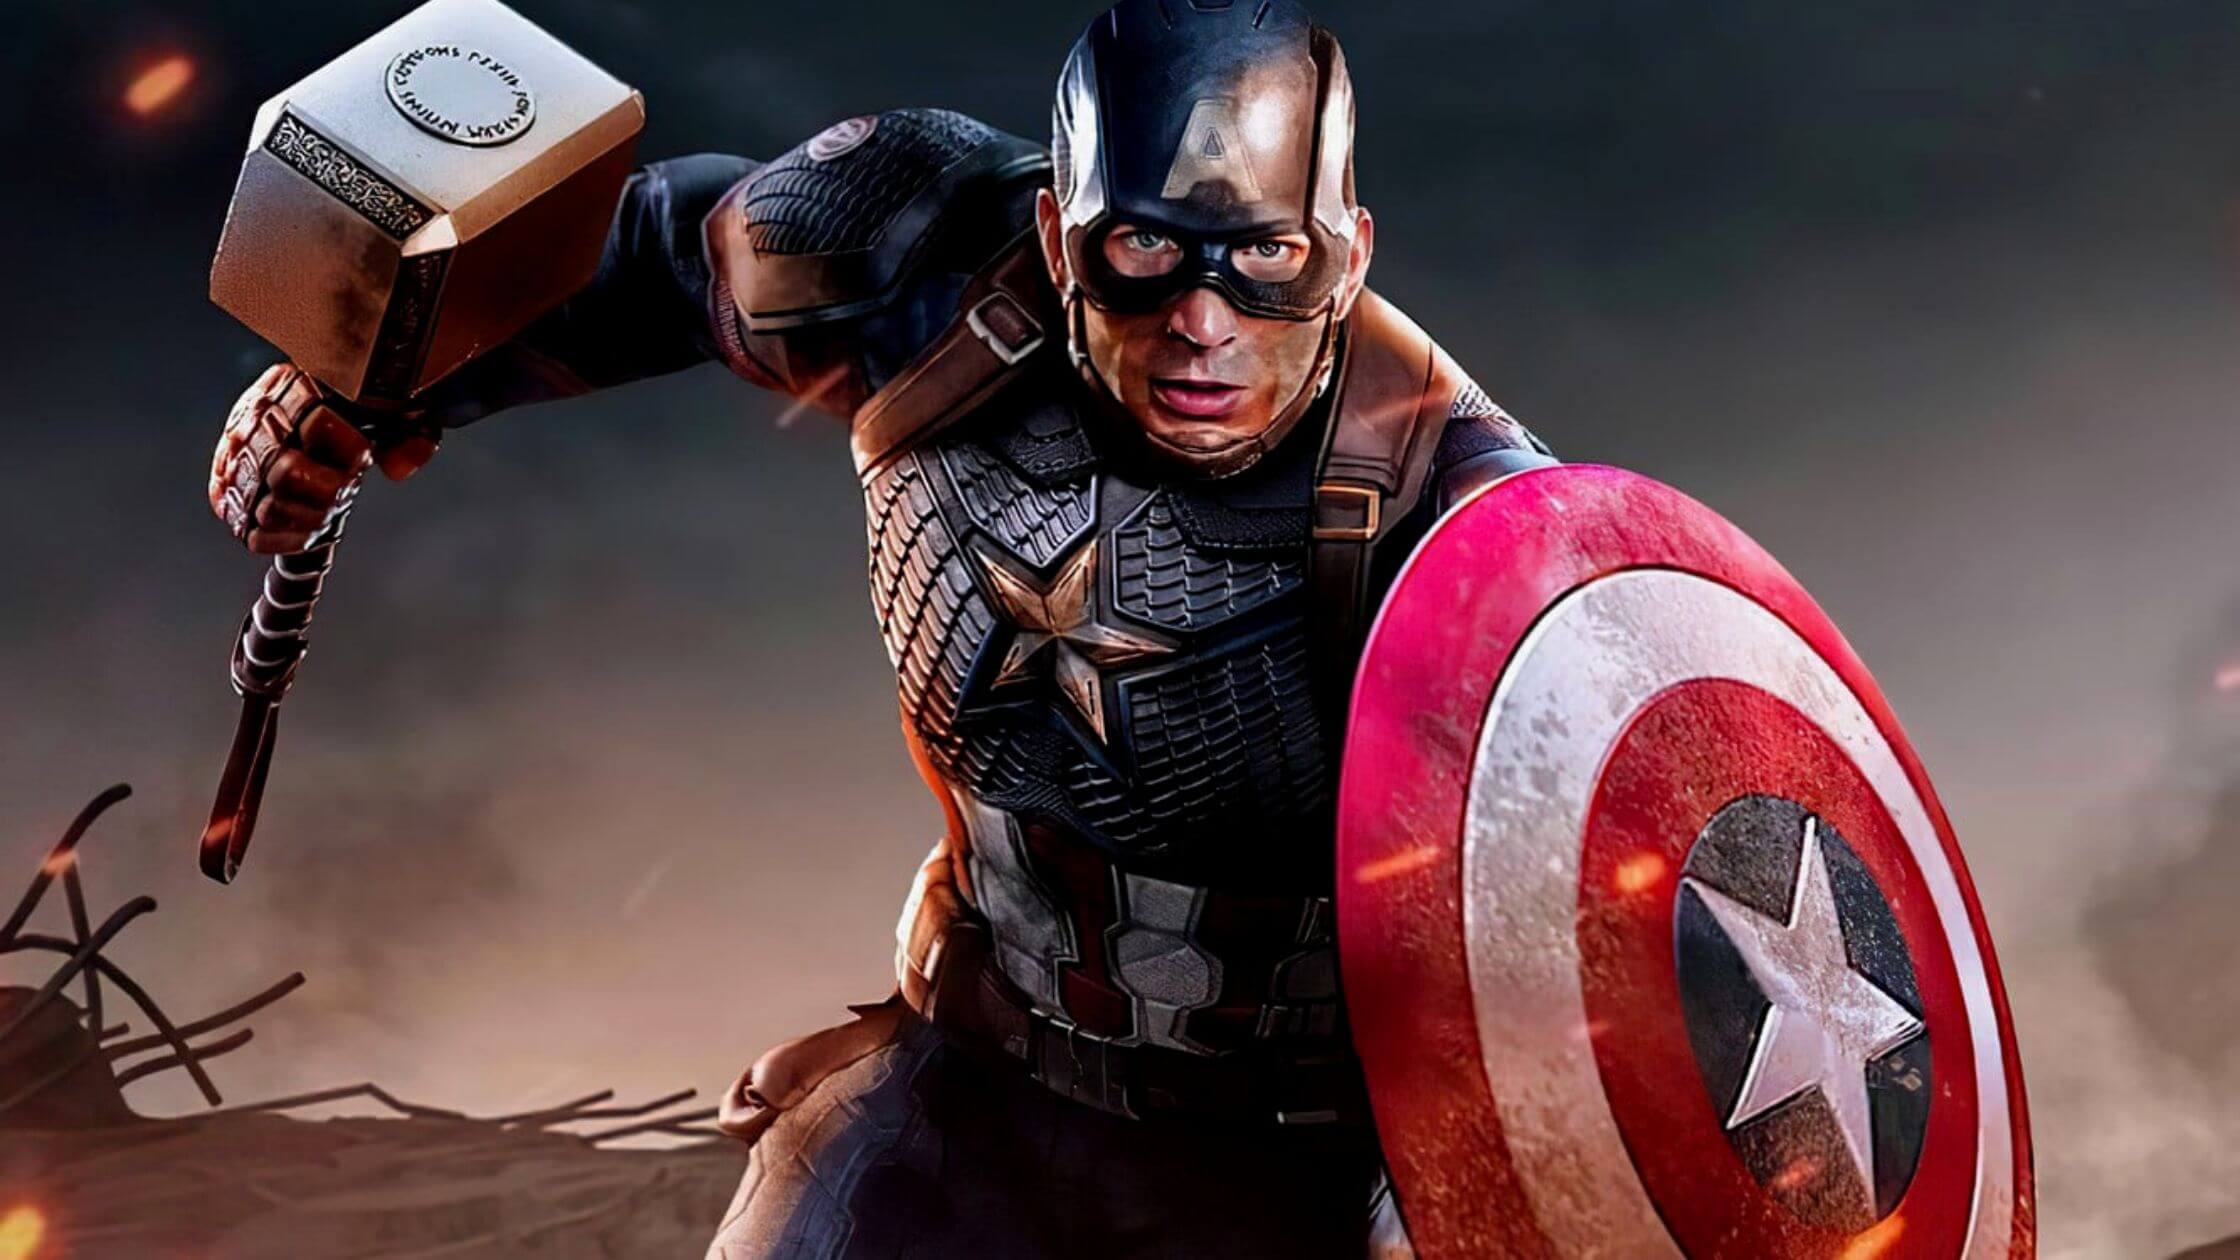 Captain America 4 Sequel Release Date Confirmed, Trailer, And More